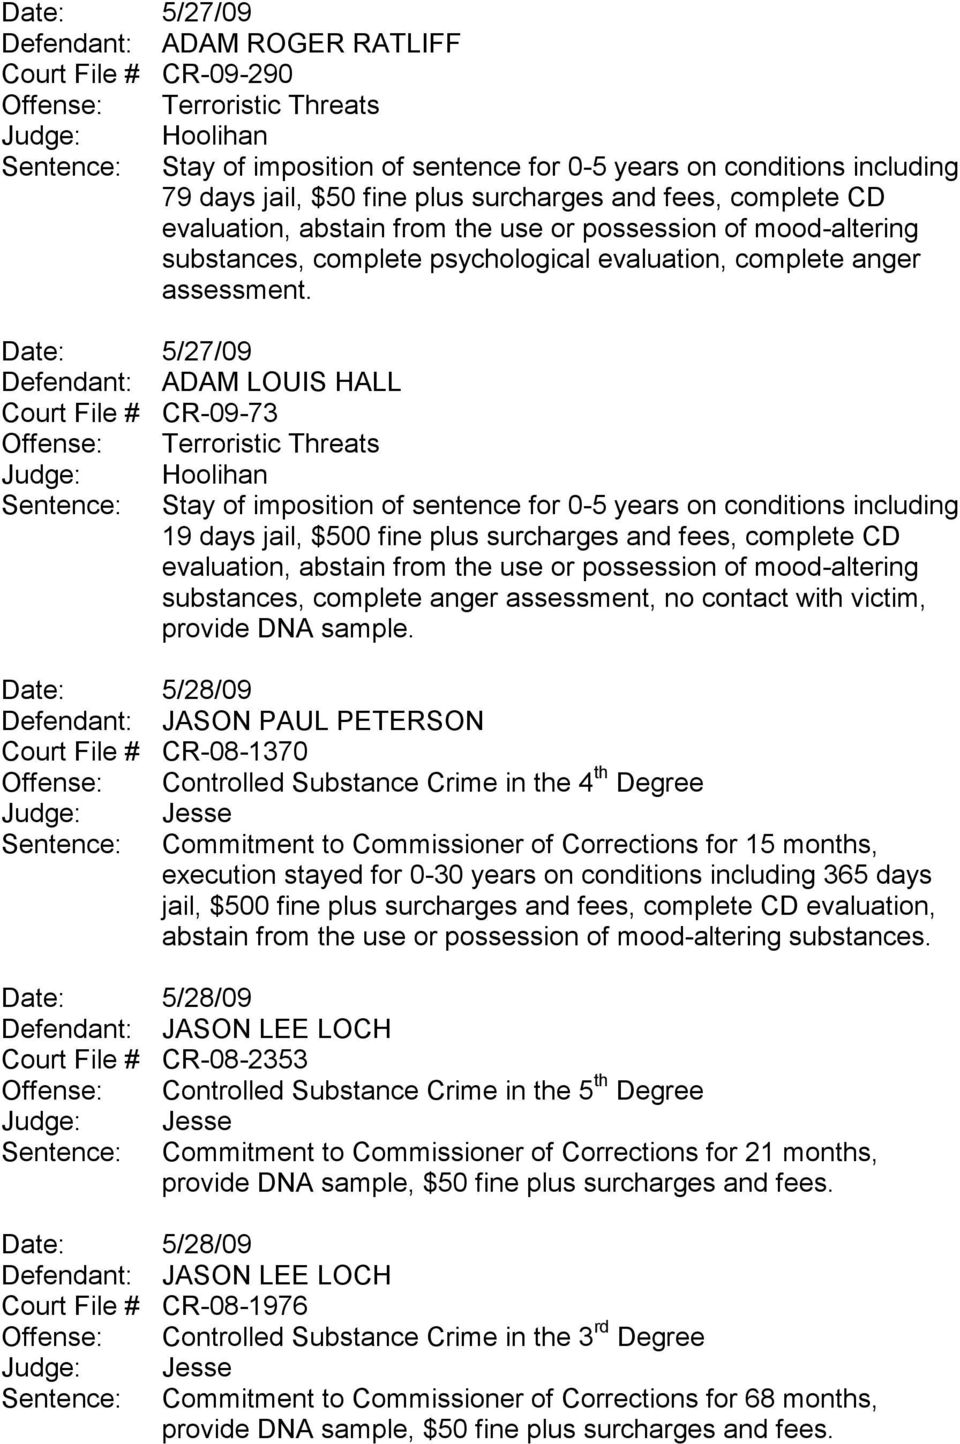 Date: 5/27/09 Defendant: ADAM LOUIS HALL Court File # CR-09-73 Offense: Terroristic Threats 19 days jail, $500 fine plus surcharges and fees, complete CD evaluation, abstain from the use or